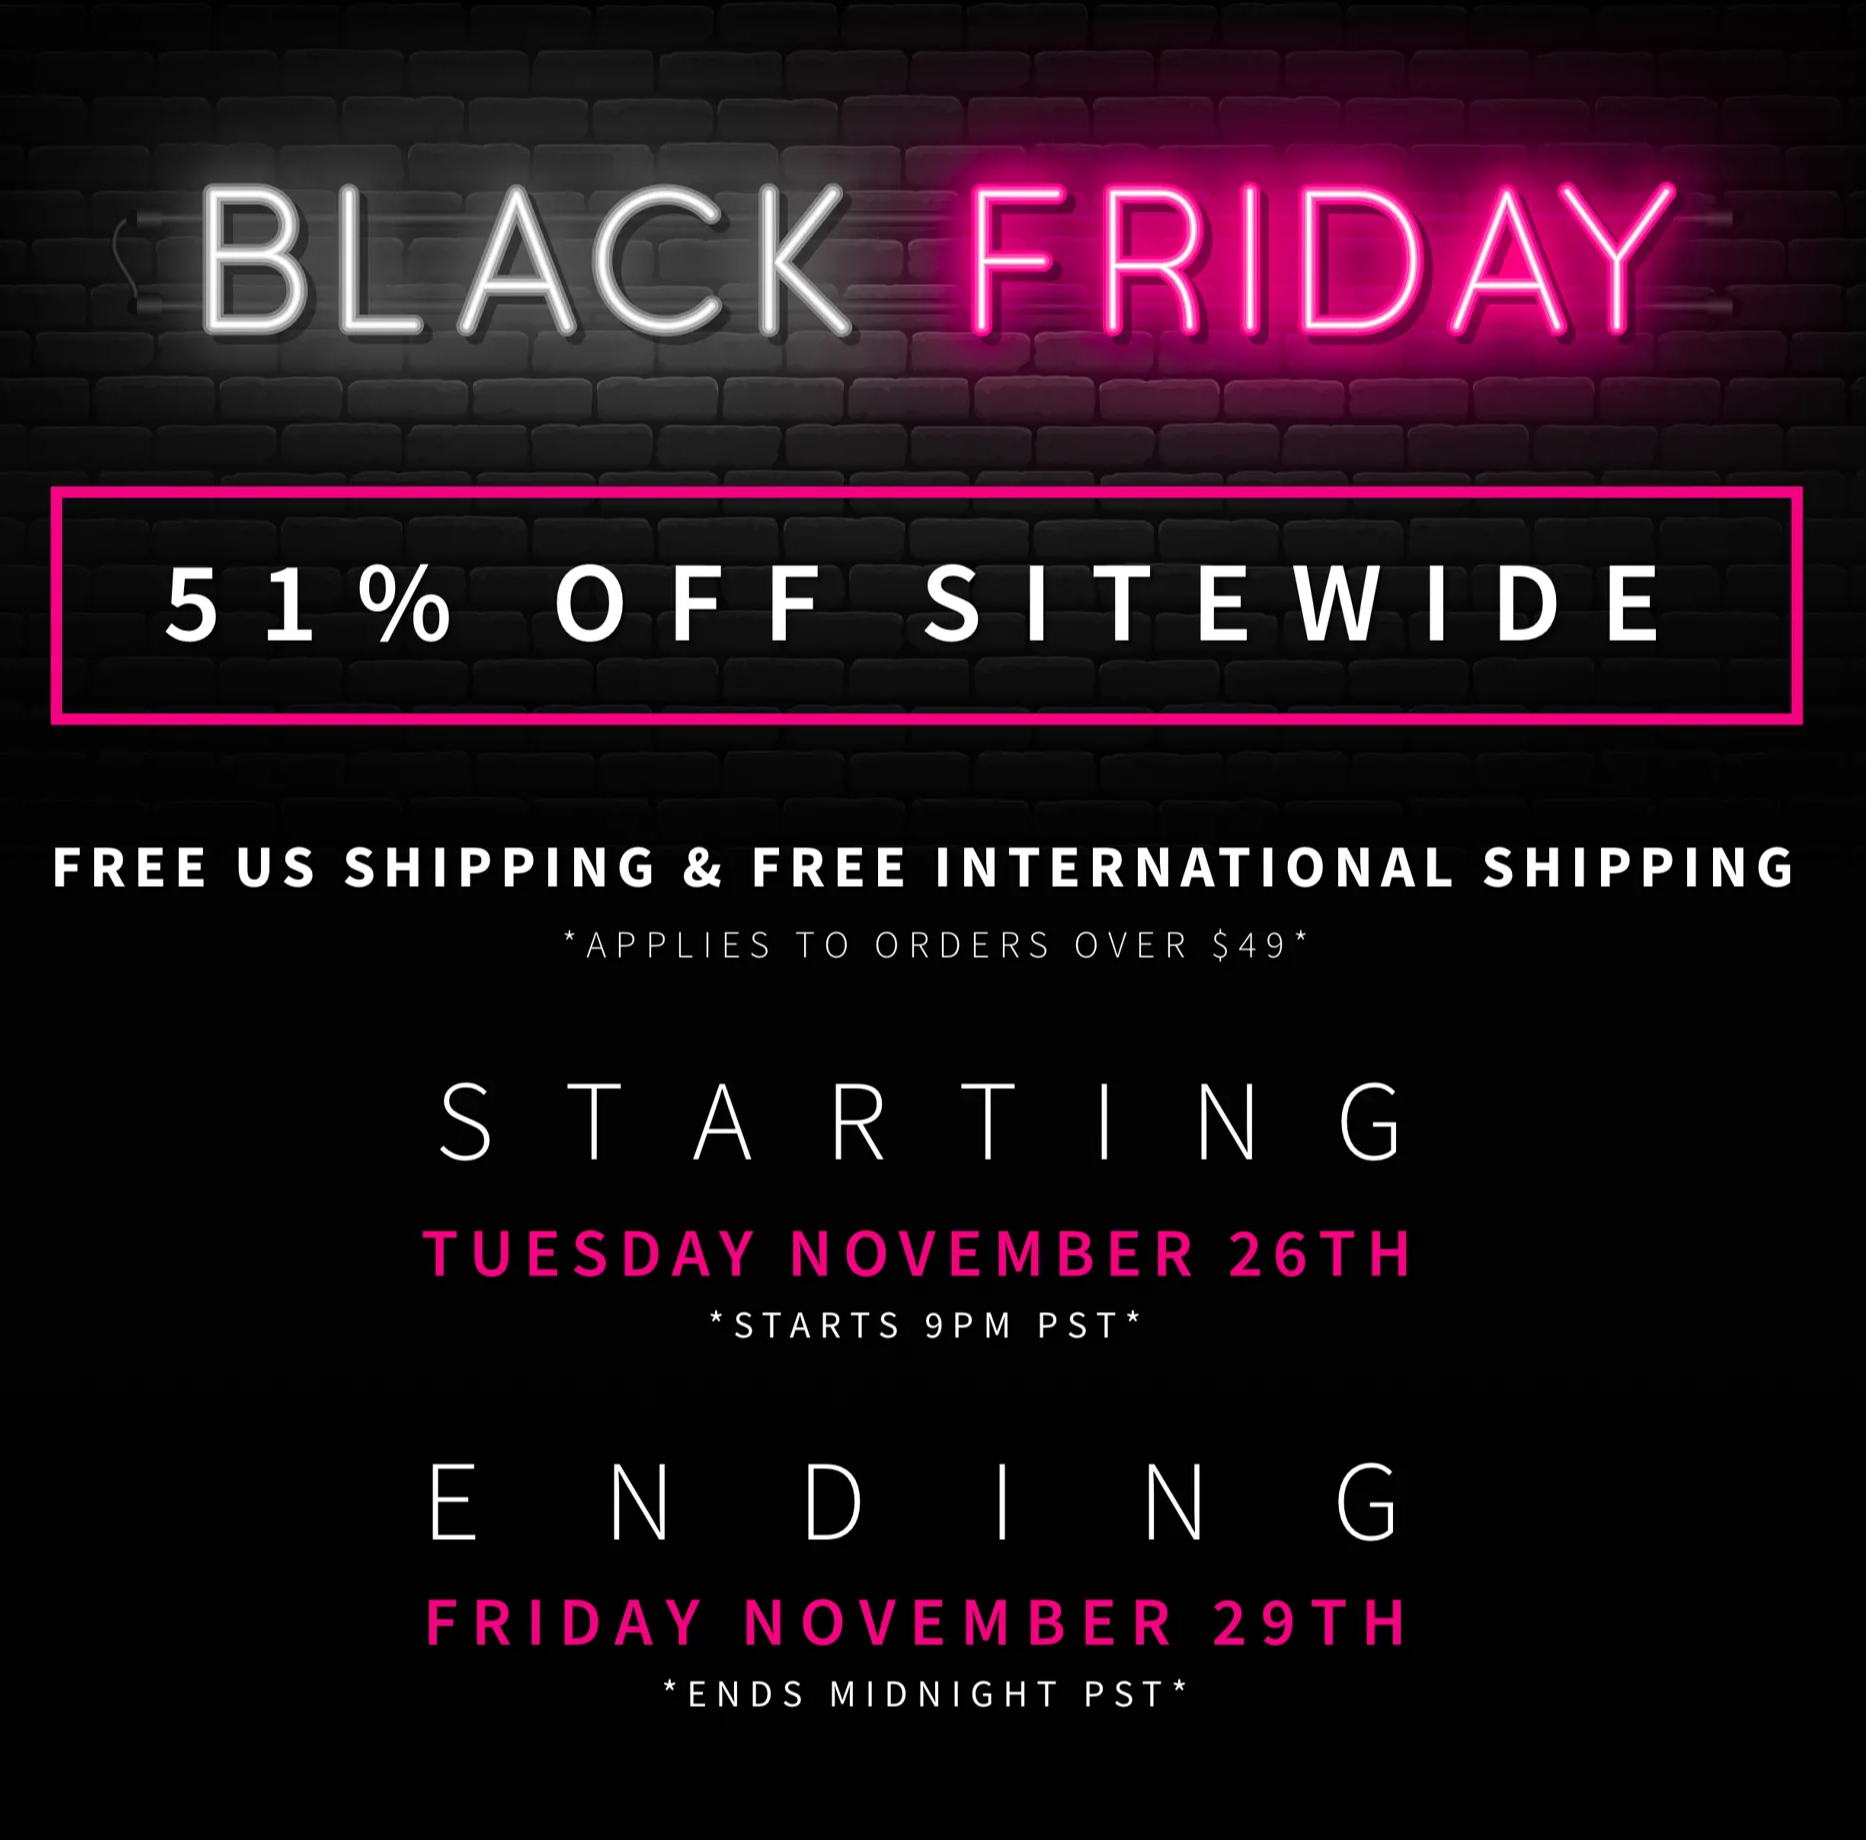 51% off site wide for Black Friday. Ending Midnight PST Friday 29th November